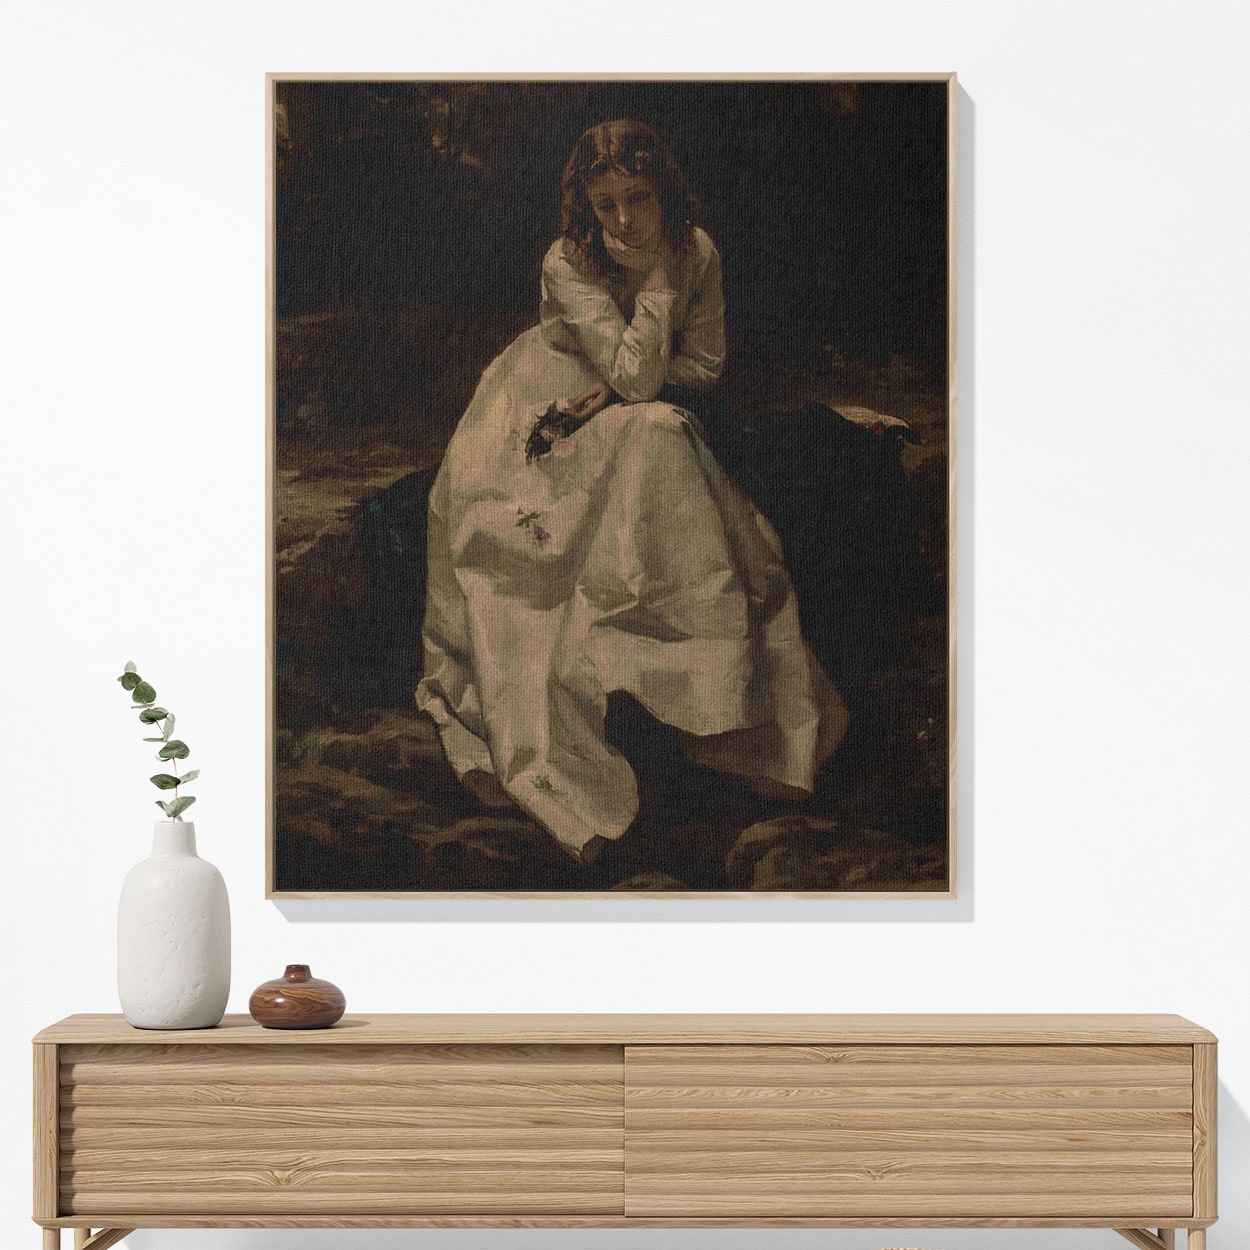 Dark Victorian Painting Woven Blanket Woven Blanket Hanging on a Wall as Framed Wall Art